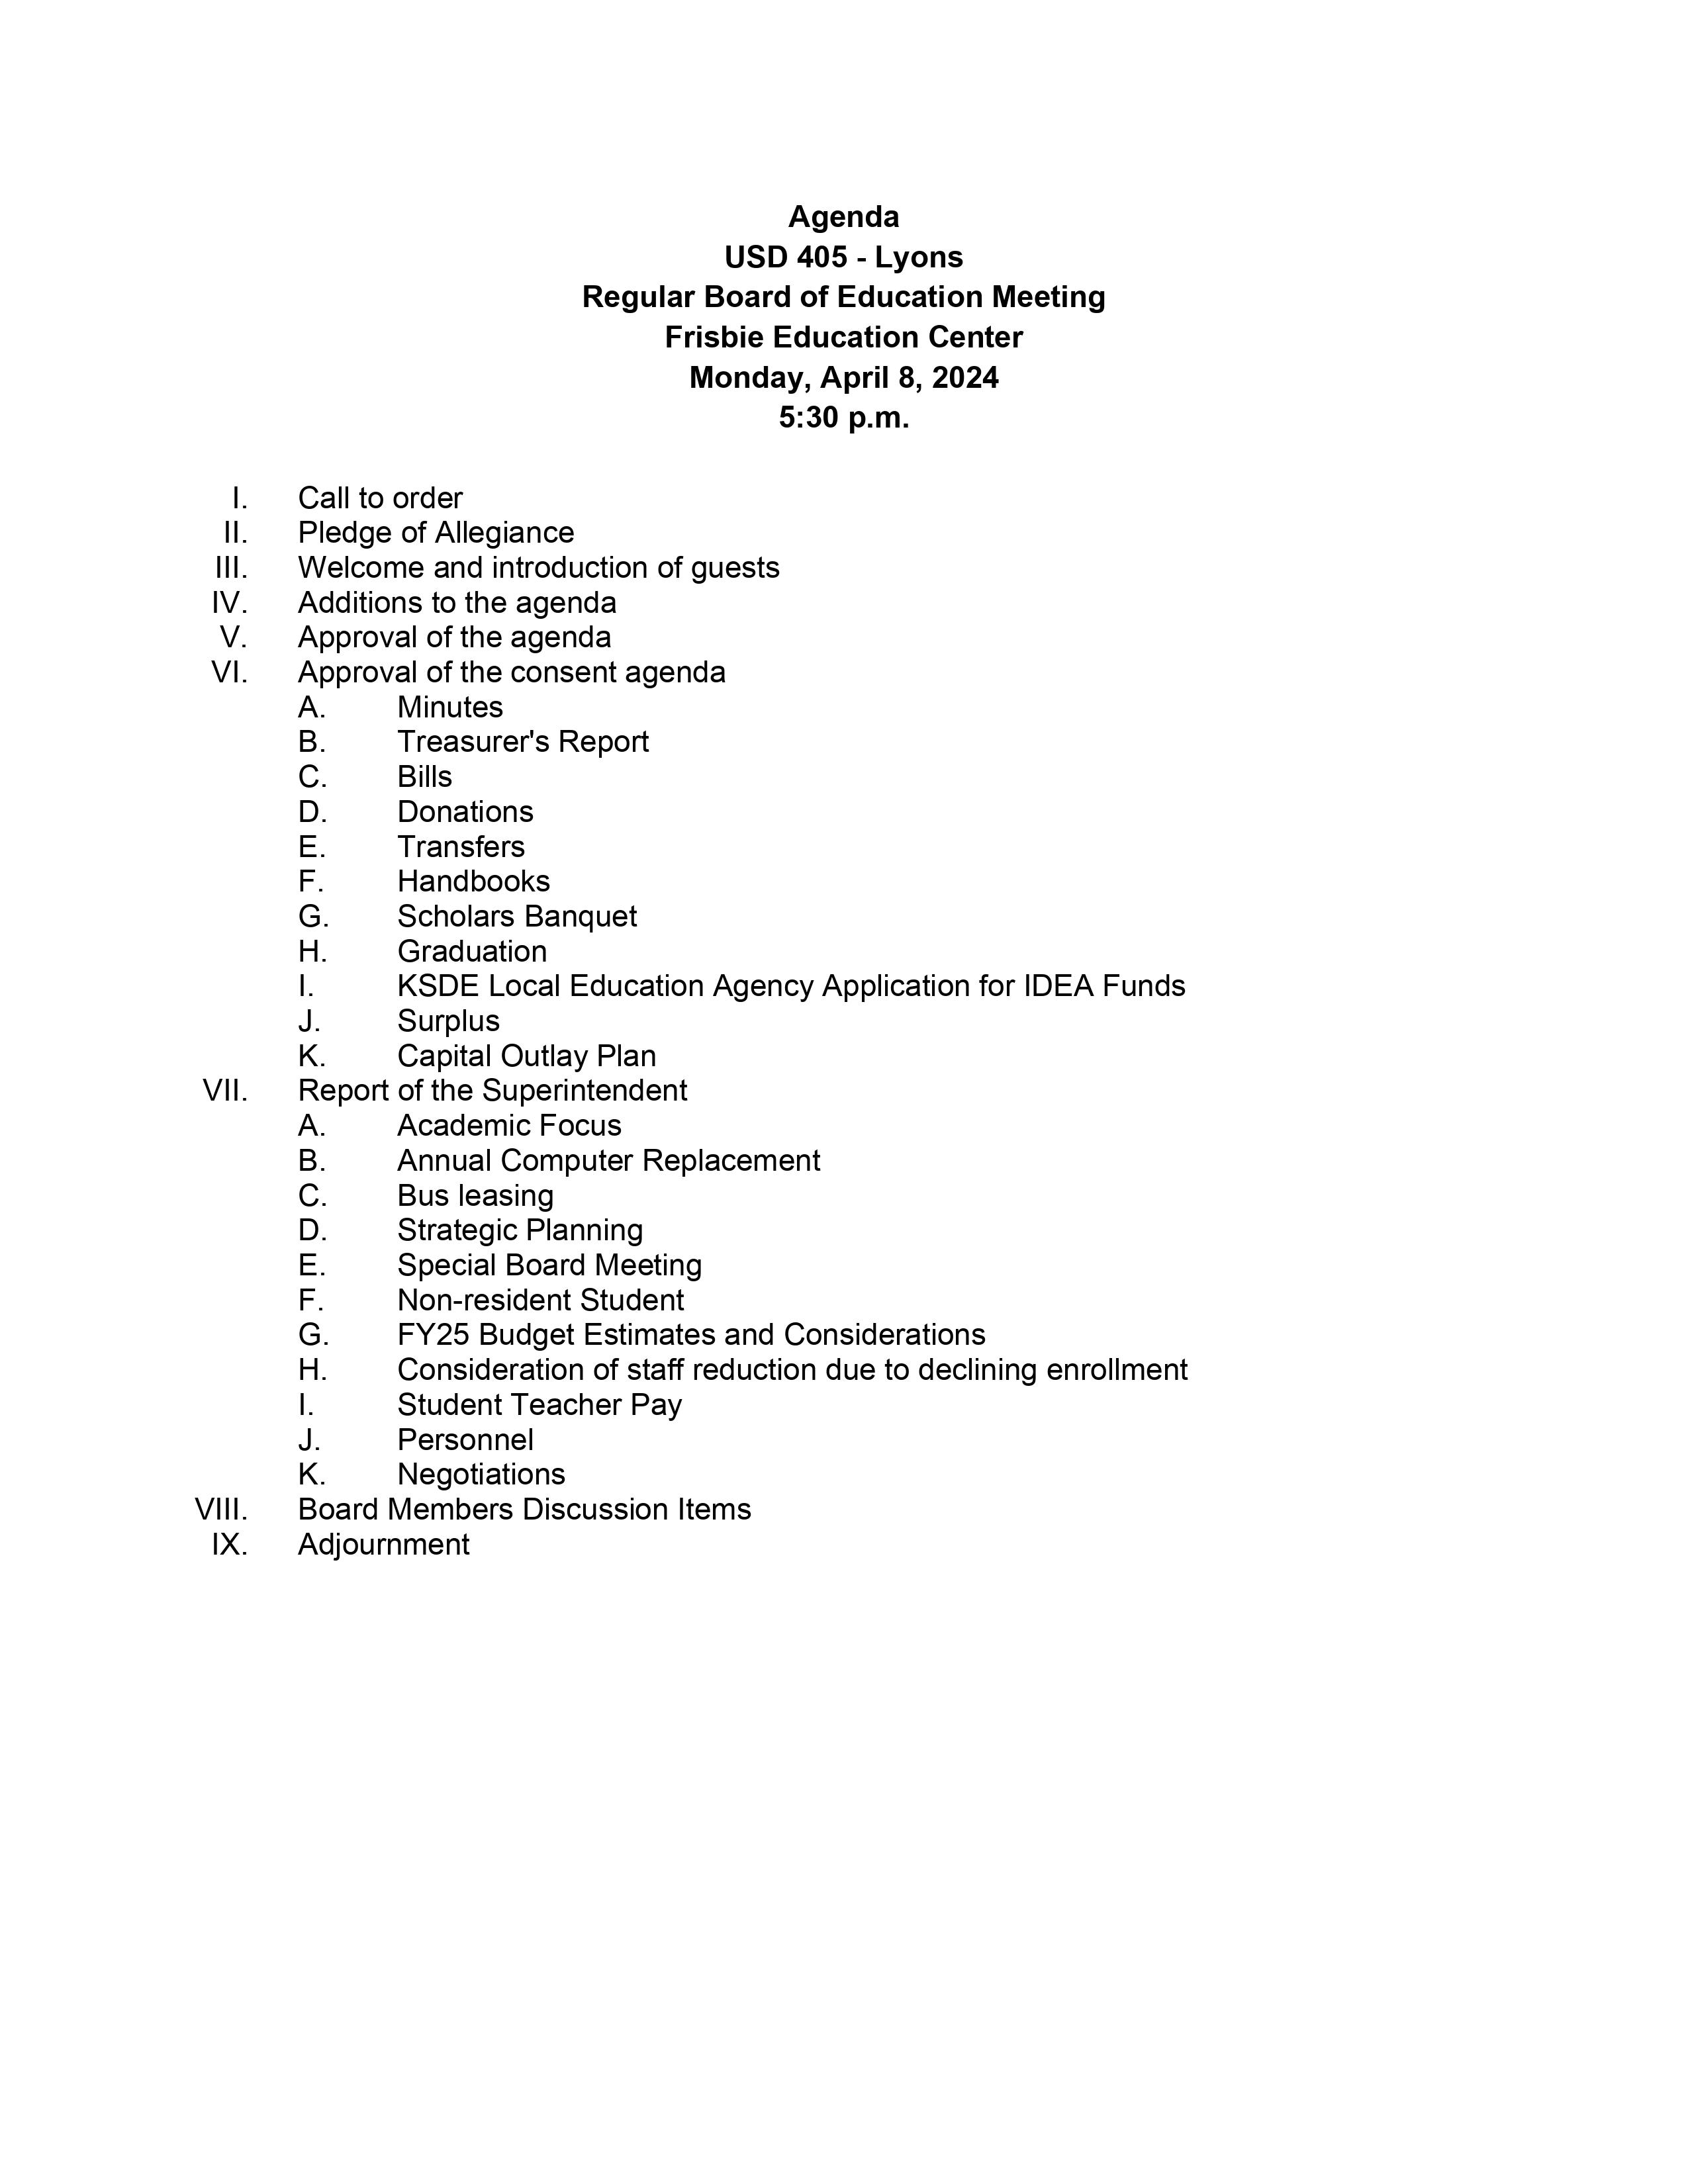 April 8th, 2024, BOE  Nonresident Hearing Agenda 5:30 PM An ADA compliant PDF is in the link above this image.